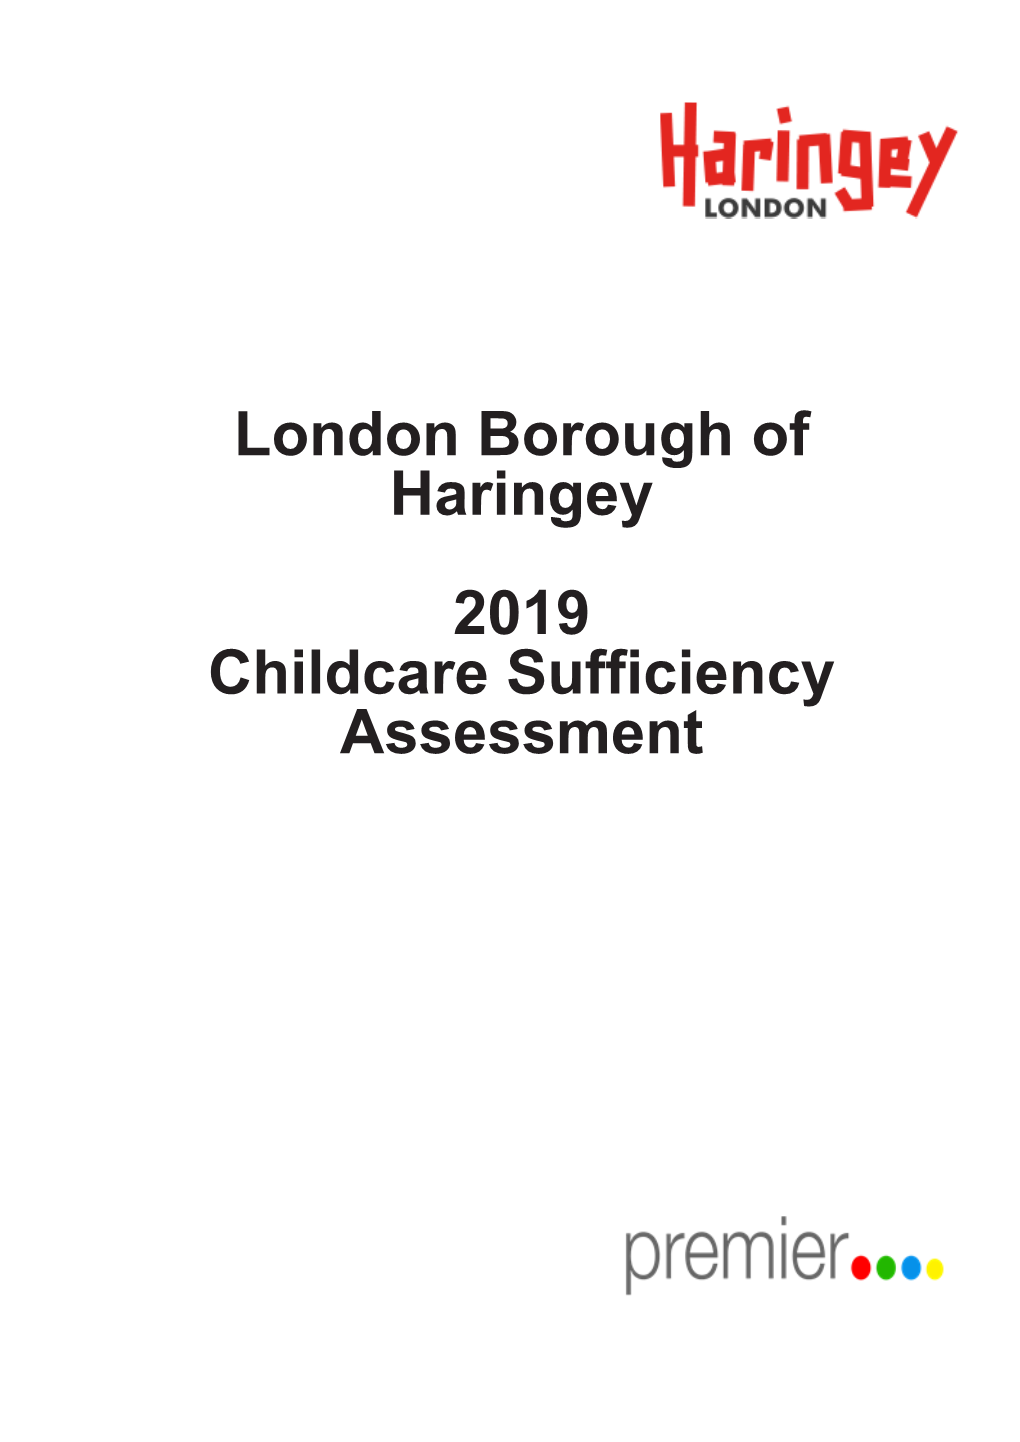 London Borough of Haringey 2019 Childcare Sufficiency Assessment